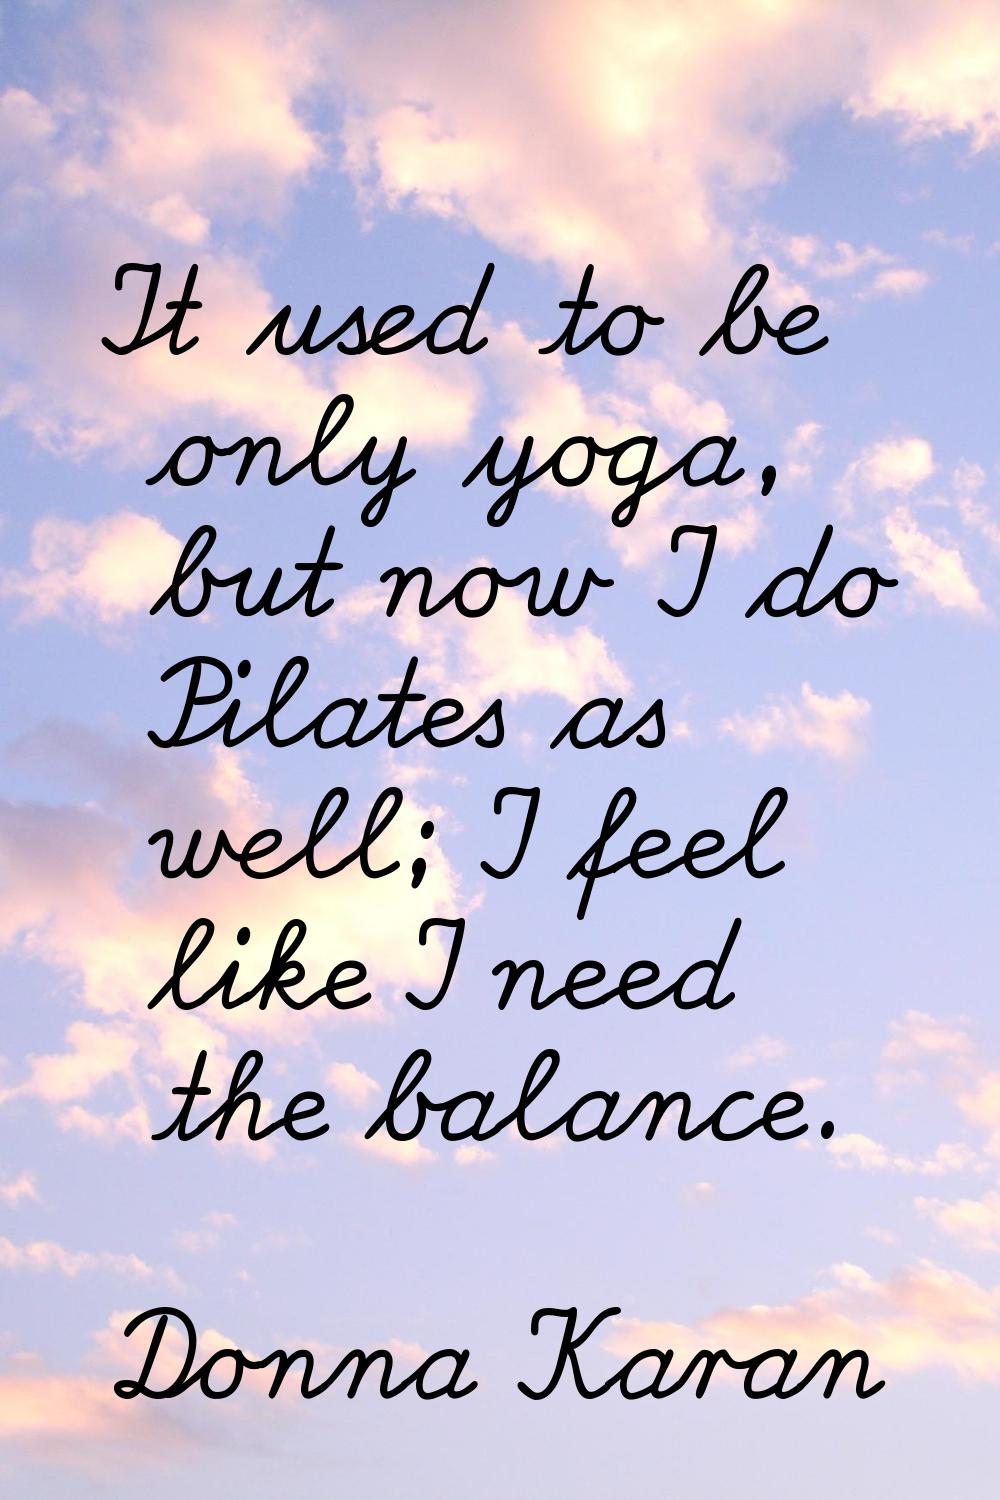 It used to be only yoga, but now I do Pilates as well; I feel like I need the balance.